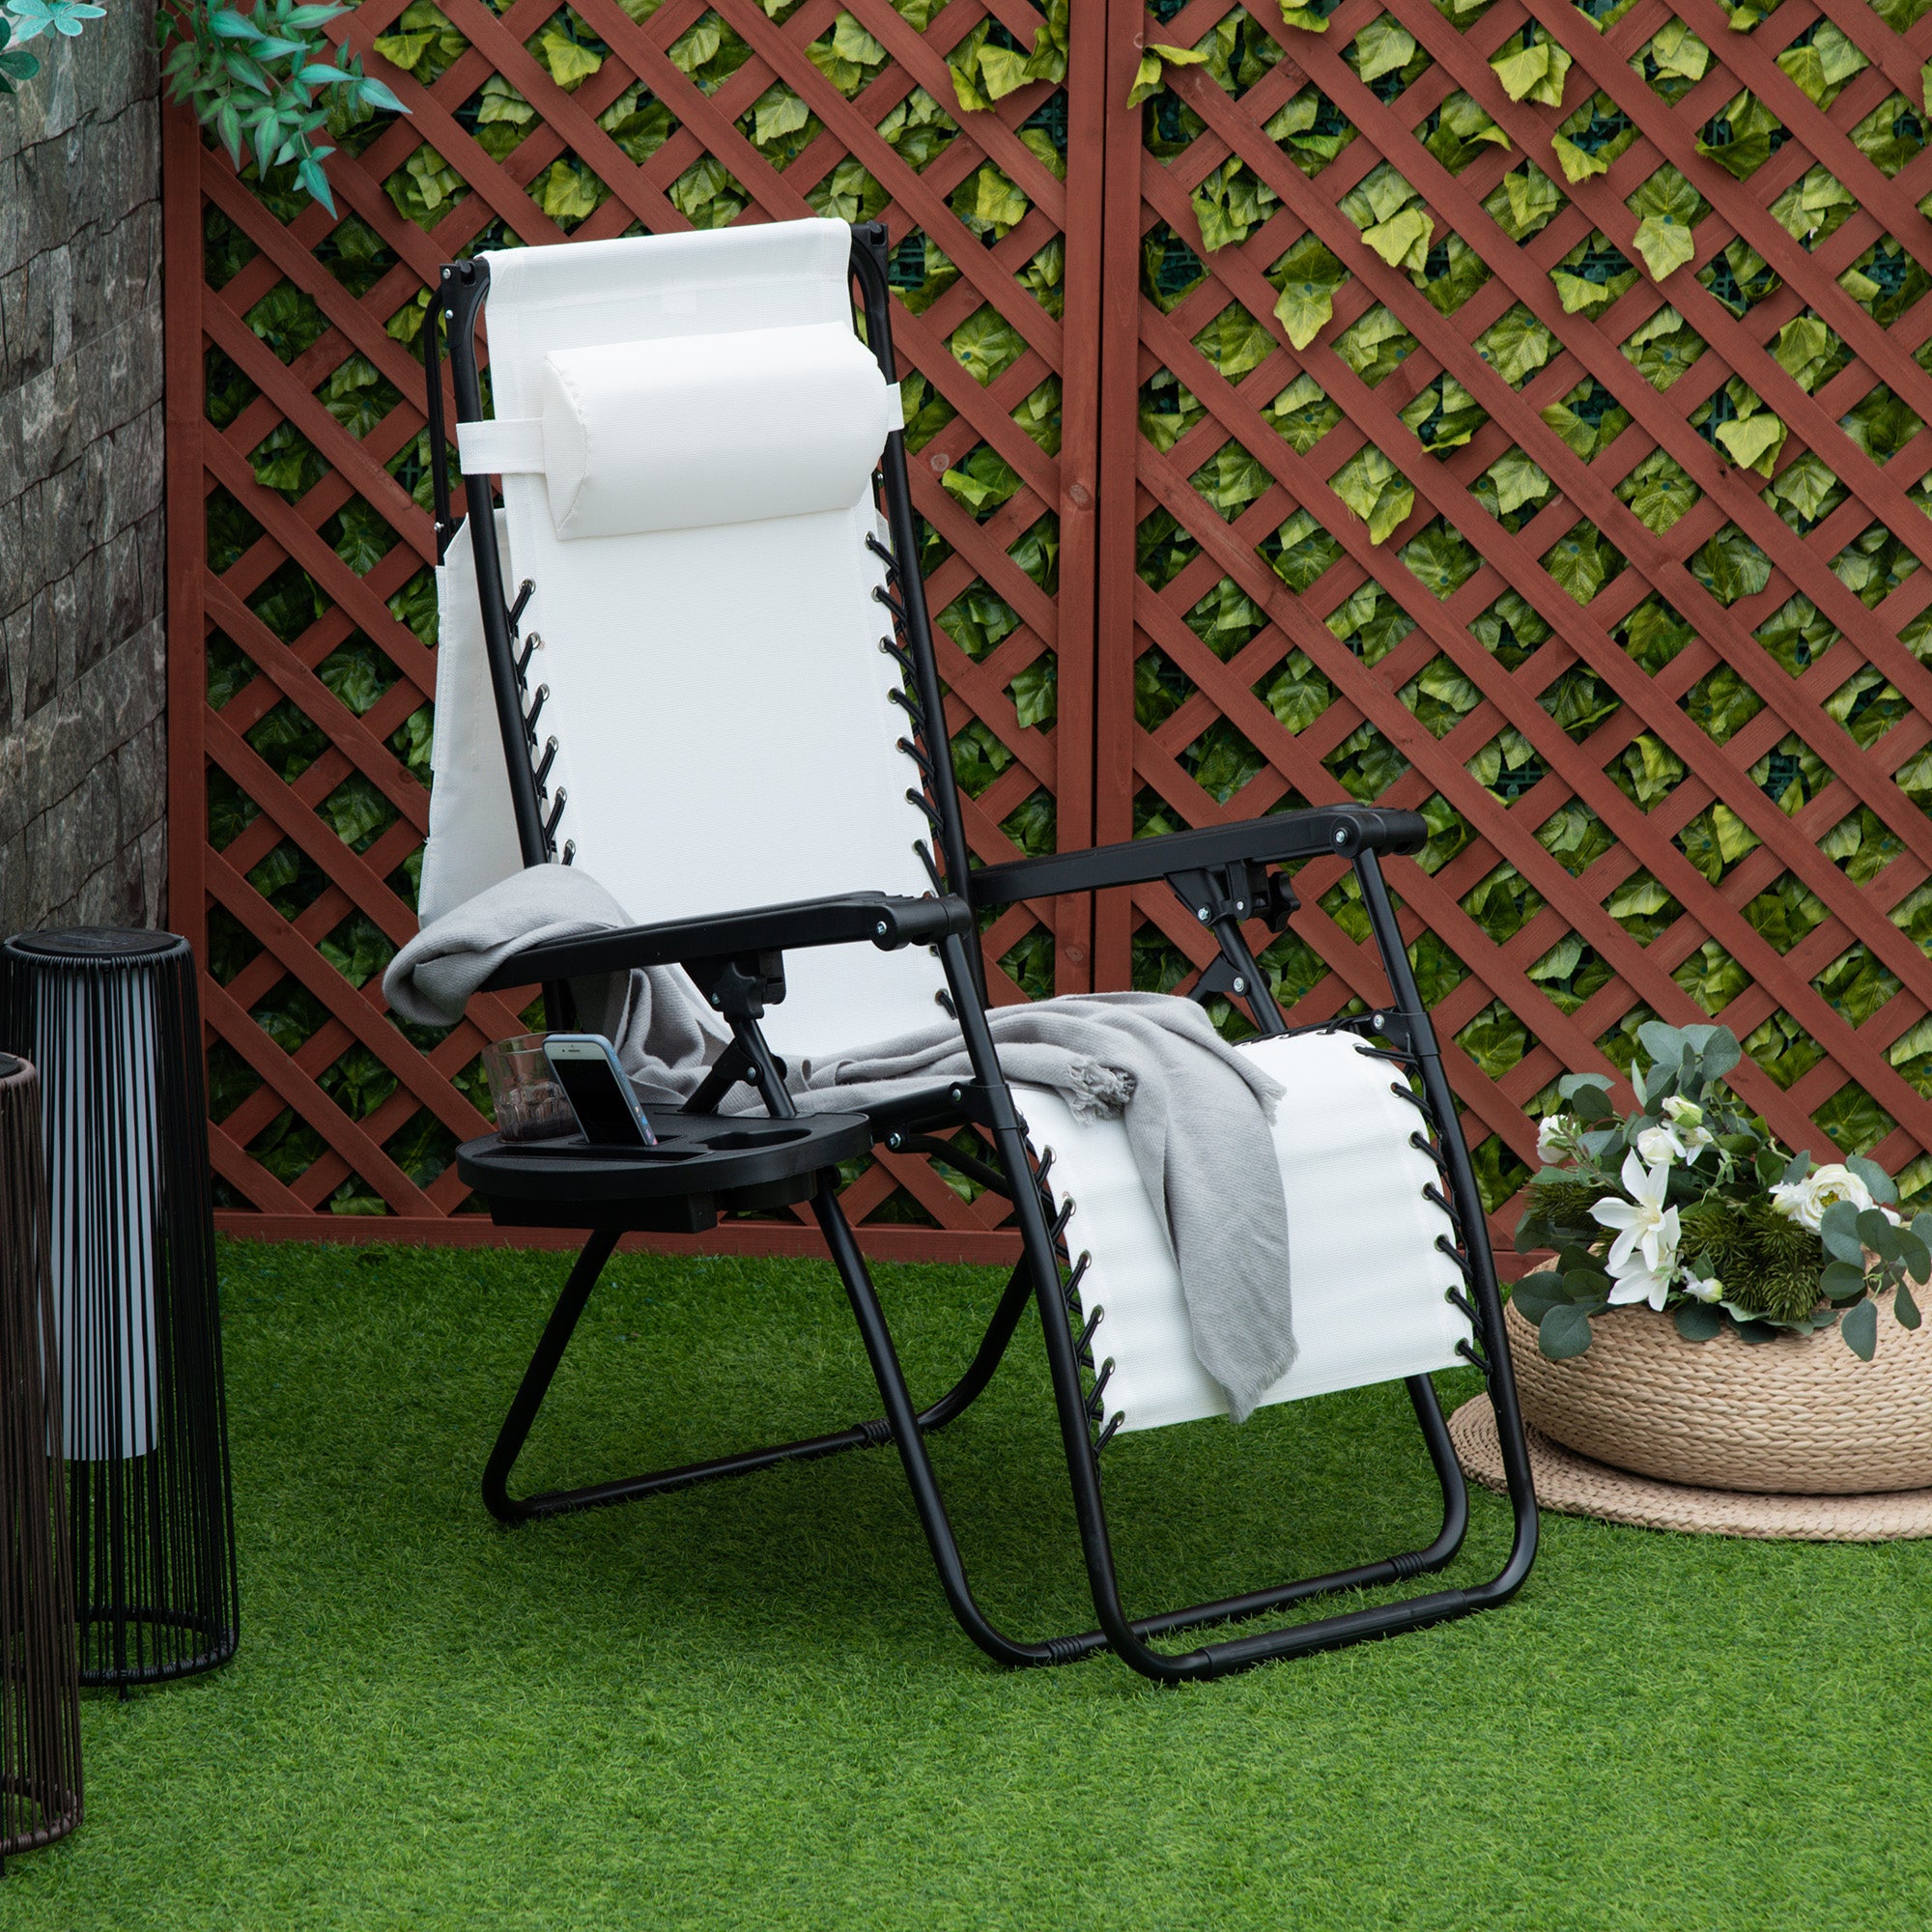 Outsunny Zero Gravity Garden Deck Folding Chair Patio Sun Lounger Reclining Seat with Cup Holder & Canopy Shade - White - Inspirely